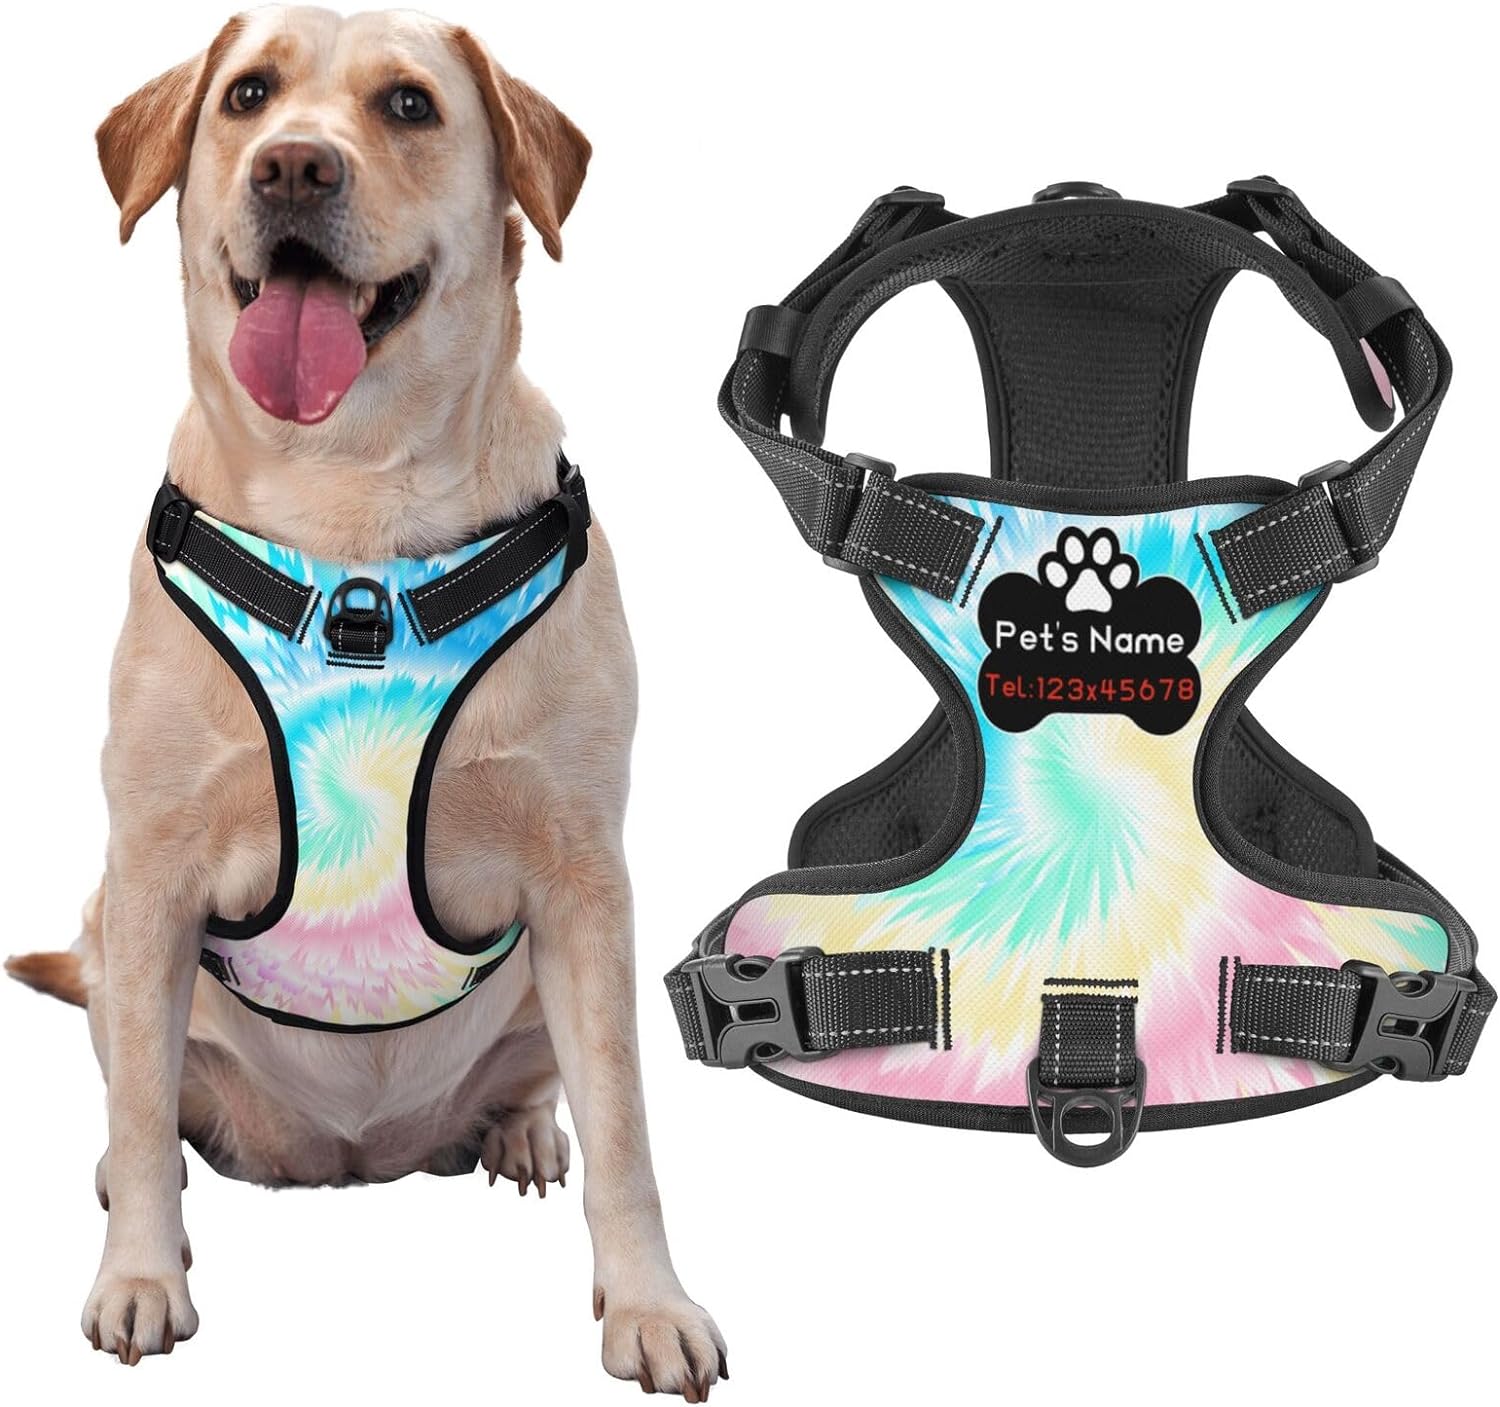 Custom No Pull Dog Harness, Personalized Colorful Tie Dye Dog Vest with Pet Name Phone Number, Customized Adjustable Reflective Pet Harness for Large Medium and Small Dogs Cats Outdoor Walking